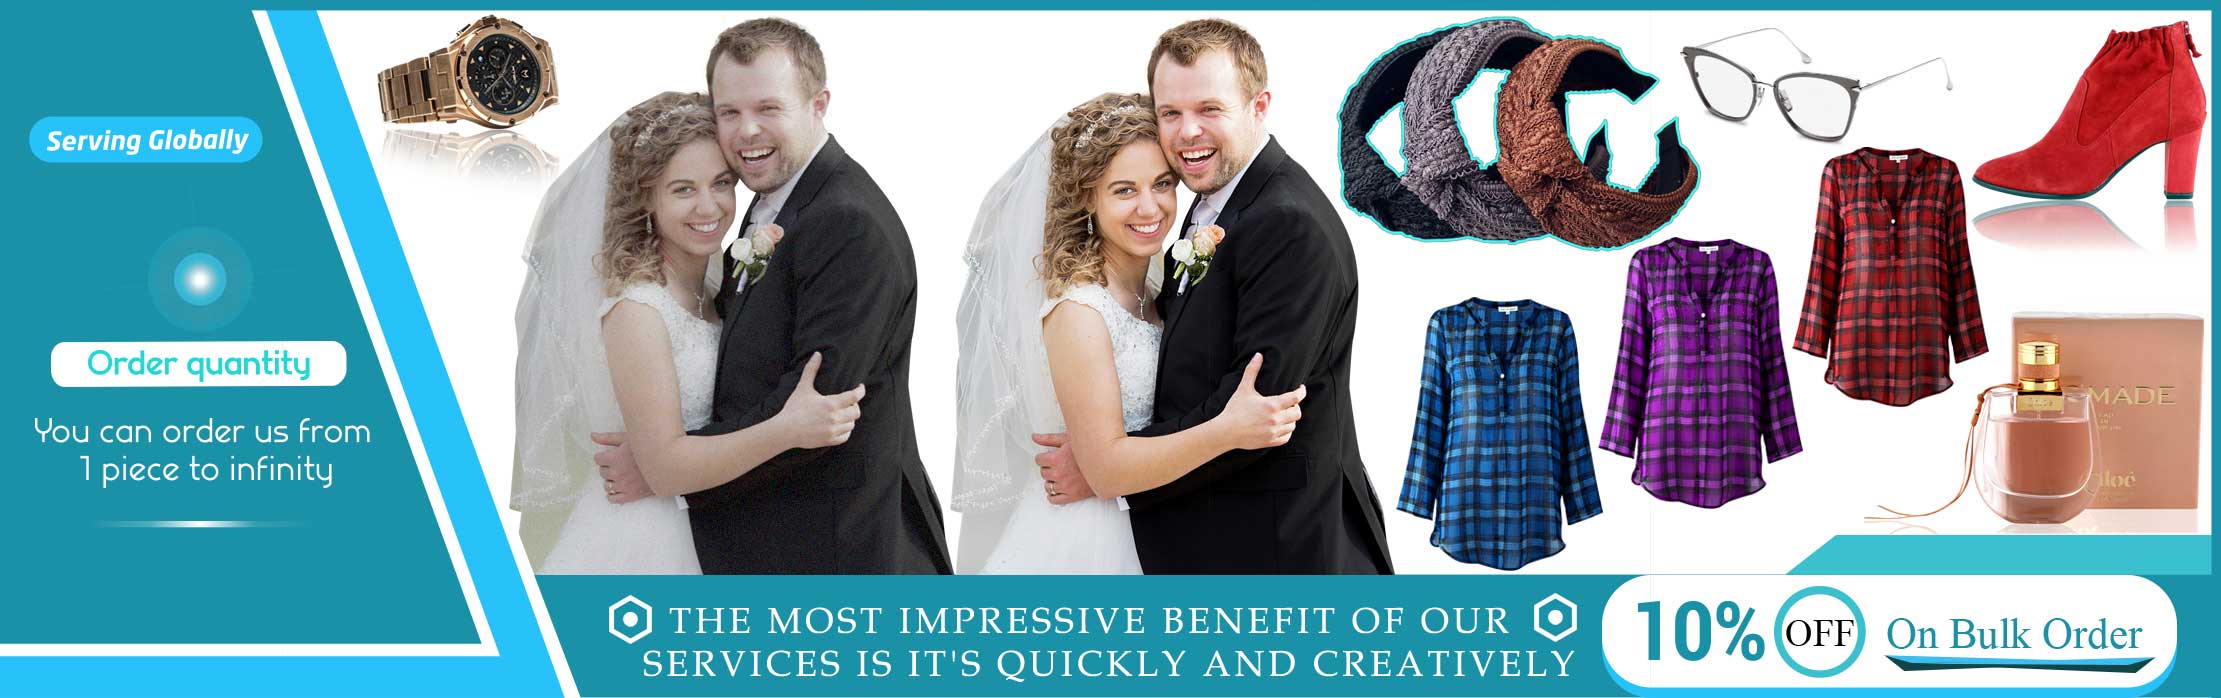 background removal services, background removal, clipping path, clipping path service, remove background online, clipping path service provider, clipping path photoshop, photoshop services, clipping path company, image background removal services, clip photo, photo background remover, image clipping service, online photo background editor, photo clipping service, best clipping path service, photo cutout, remove background from image online, remove background from image, photo retouching services, photo editor remove background, photo background removal service, clip image, online photo editor remove background, photo editor, clipping path service company, photo retouch, image clipping path services, clipping service, photo editing services, image clipping path, photoshop clipping path service, image editing services, photo background editor, photo clipping path, photoshop editing services, photoshop clipping path service company, clipping path USA, clipping path provider, photo background, image masking service, change background of photo online, online photo background remover, image cutout service, image editing company, background changer of photo, background remover, cut out pictures, image editor, remove picture background, clipping path image, photo resize, image resize service, photo crop service, photo cropping, modern logo design, logo design service, design service, banner design service, creative banner design service, creative banner, banner design, modern banner design